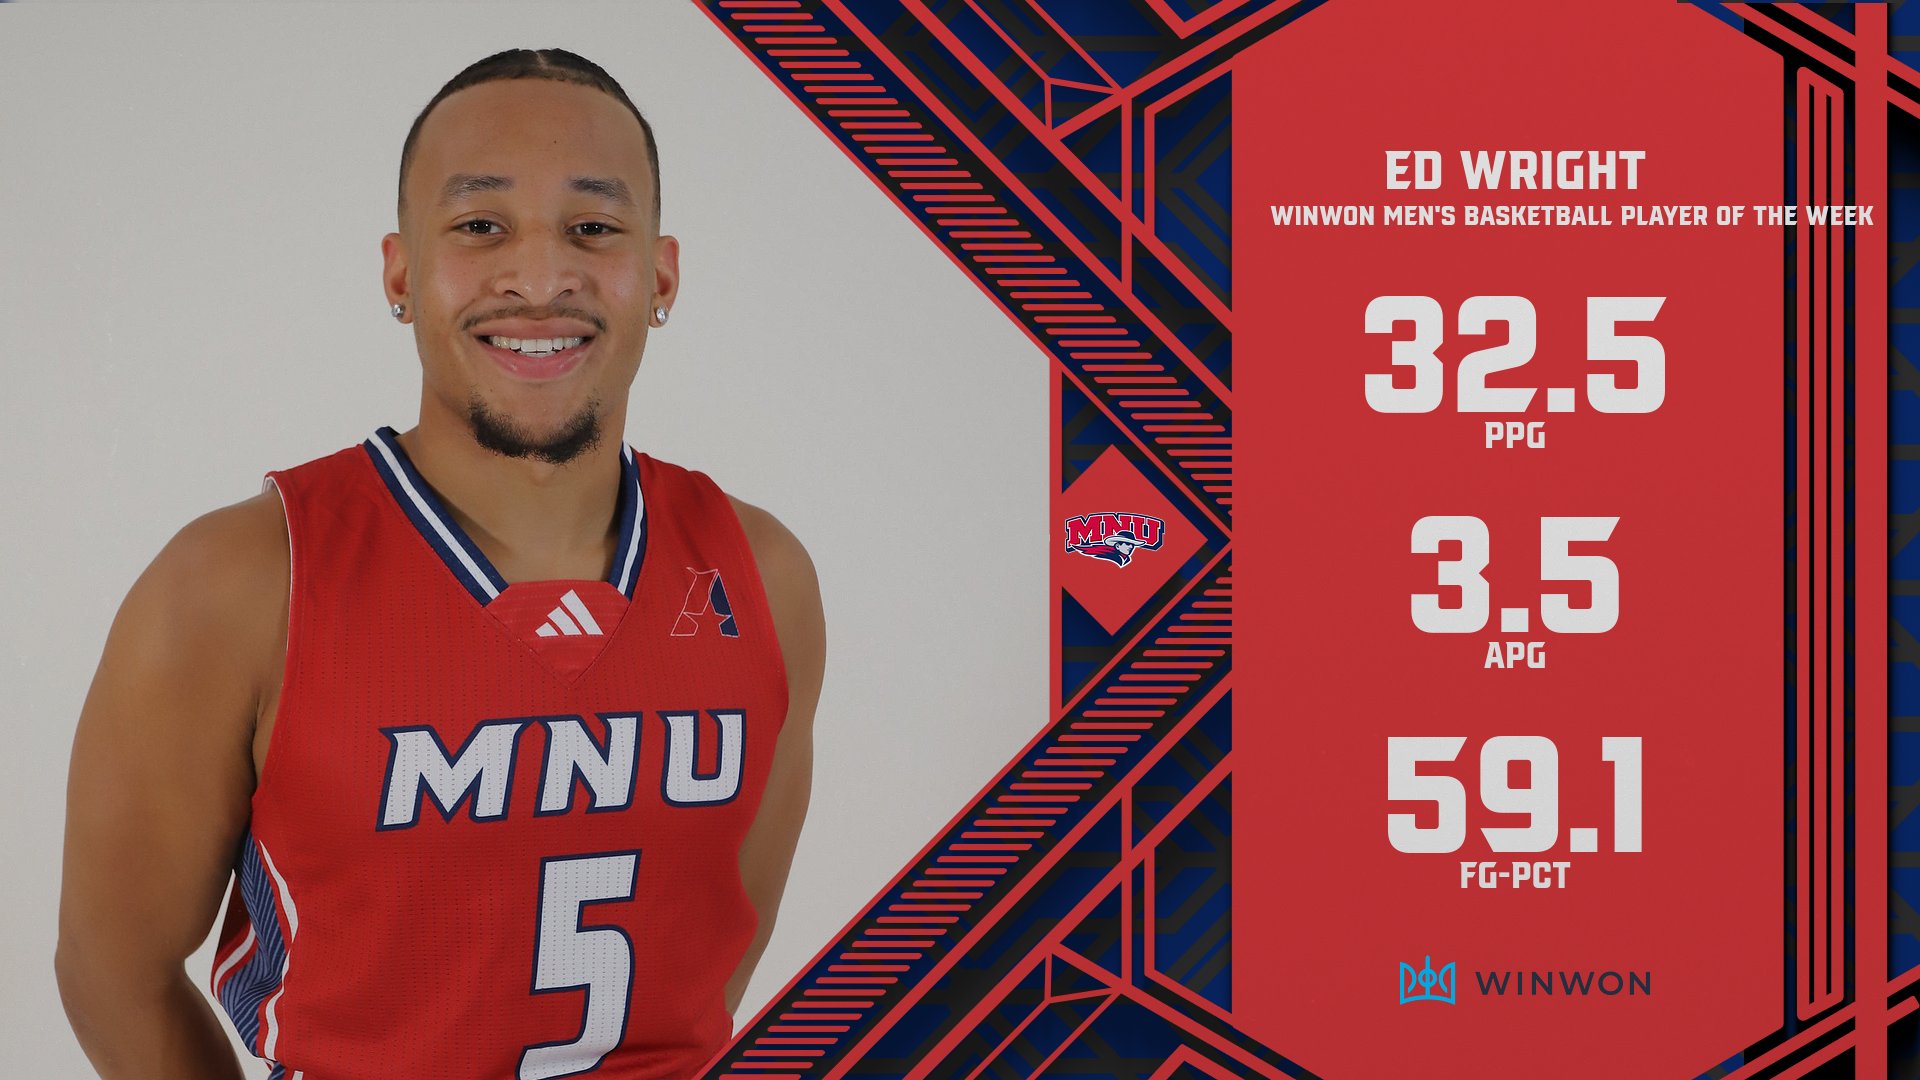 Ed Wright of No. 15 MidAmerica Nazarene Earns Second WinWon Men’s Basketball Player of the Week